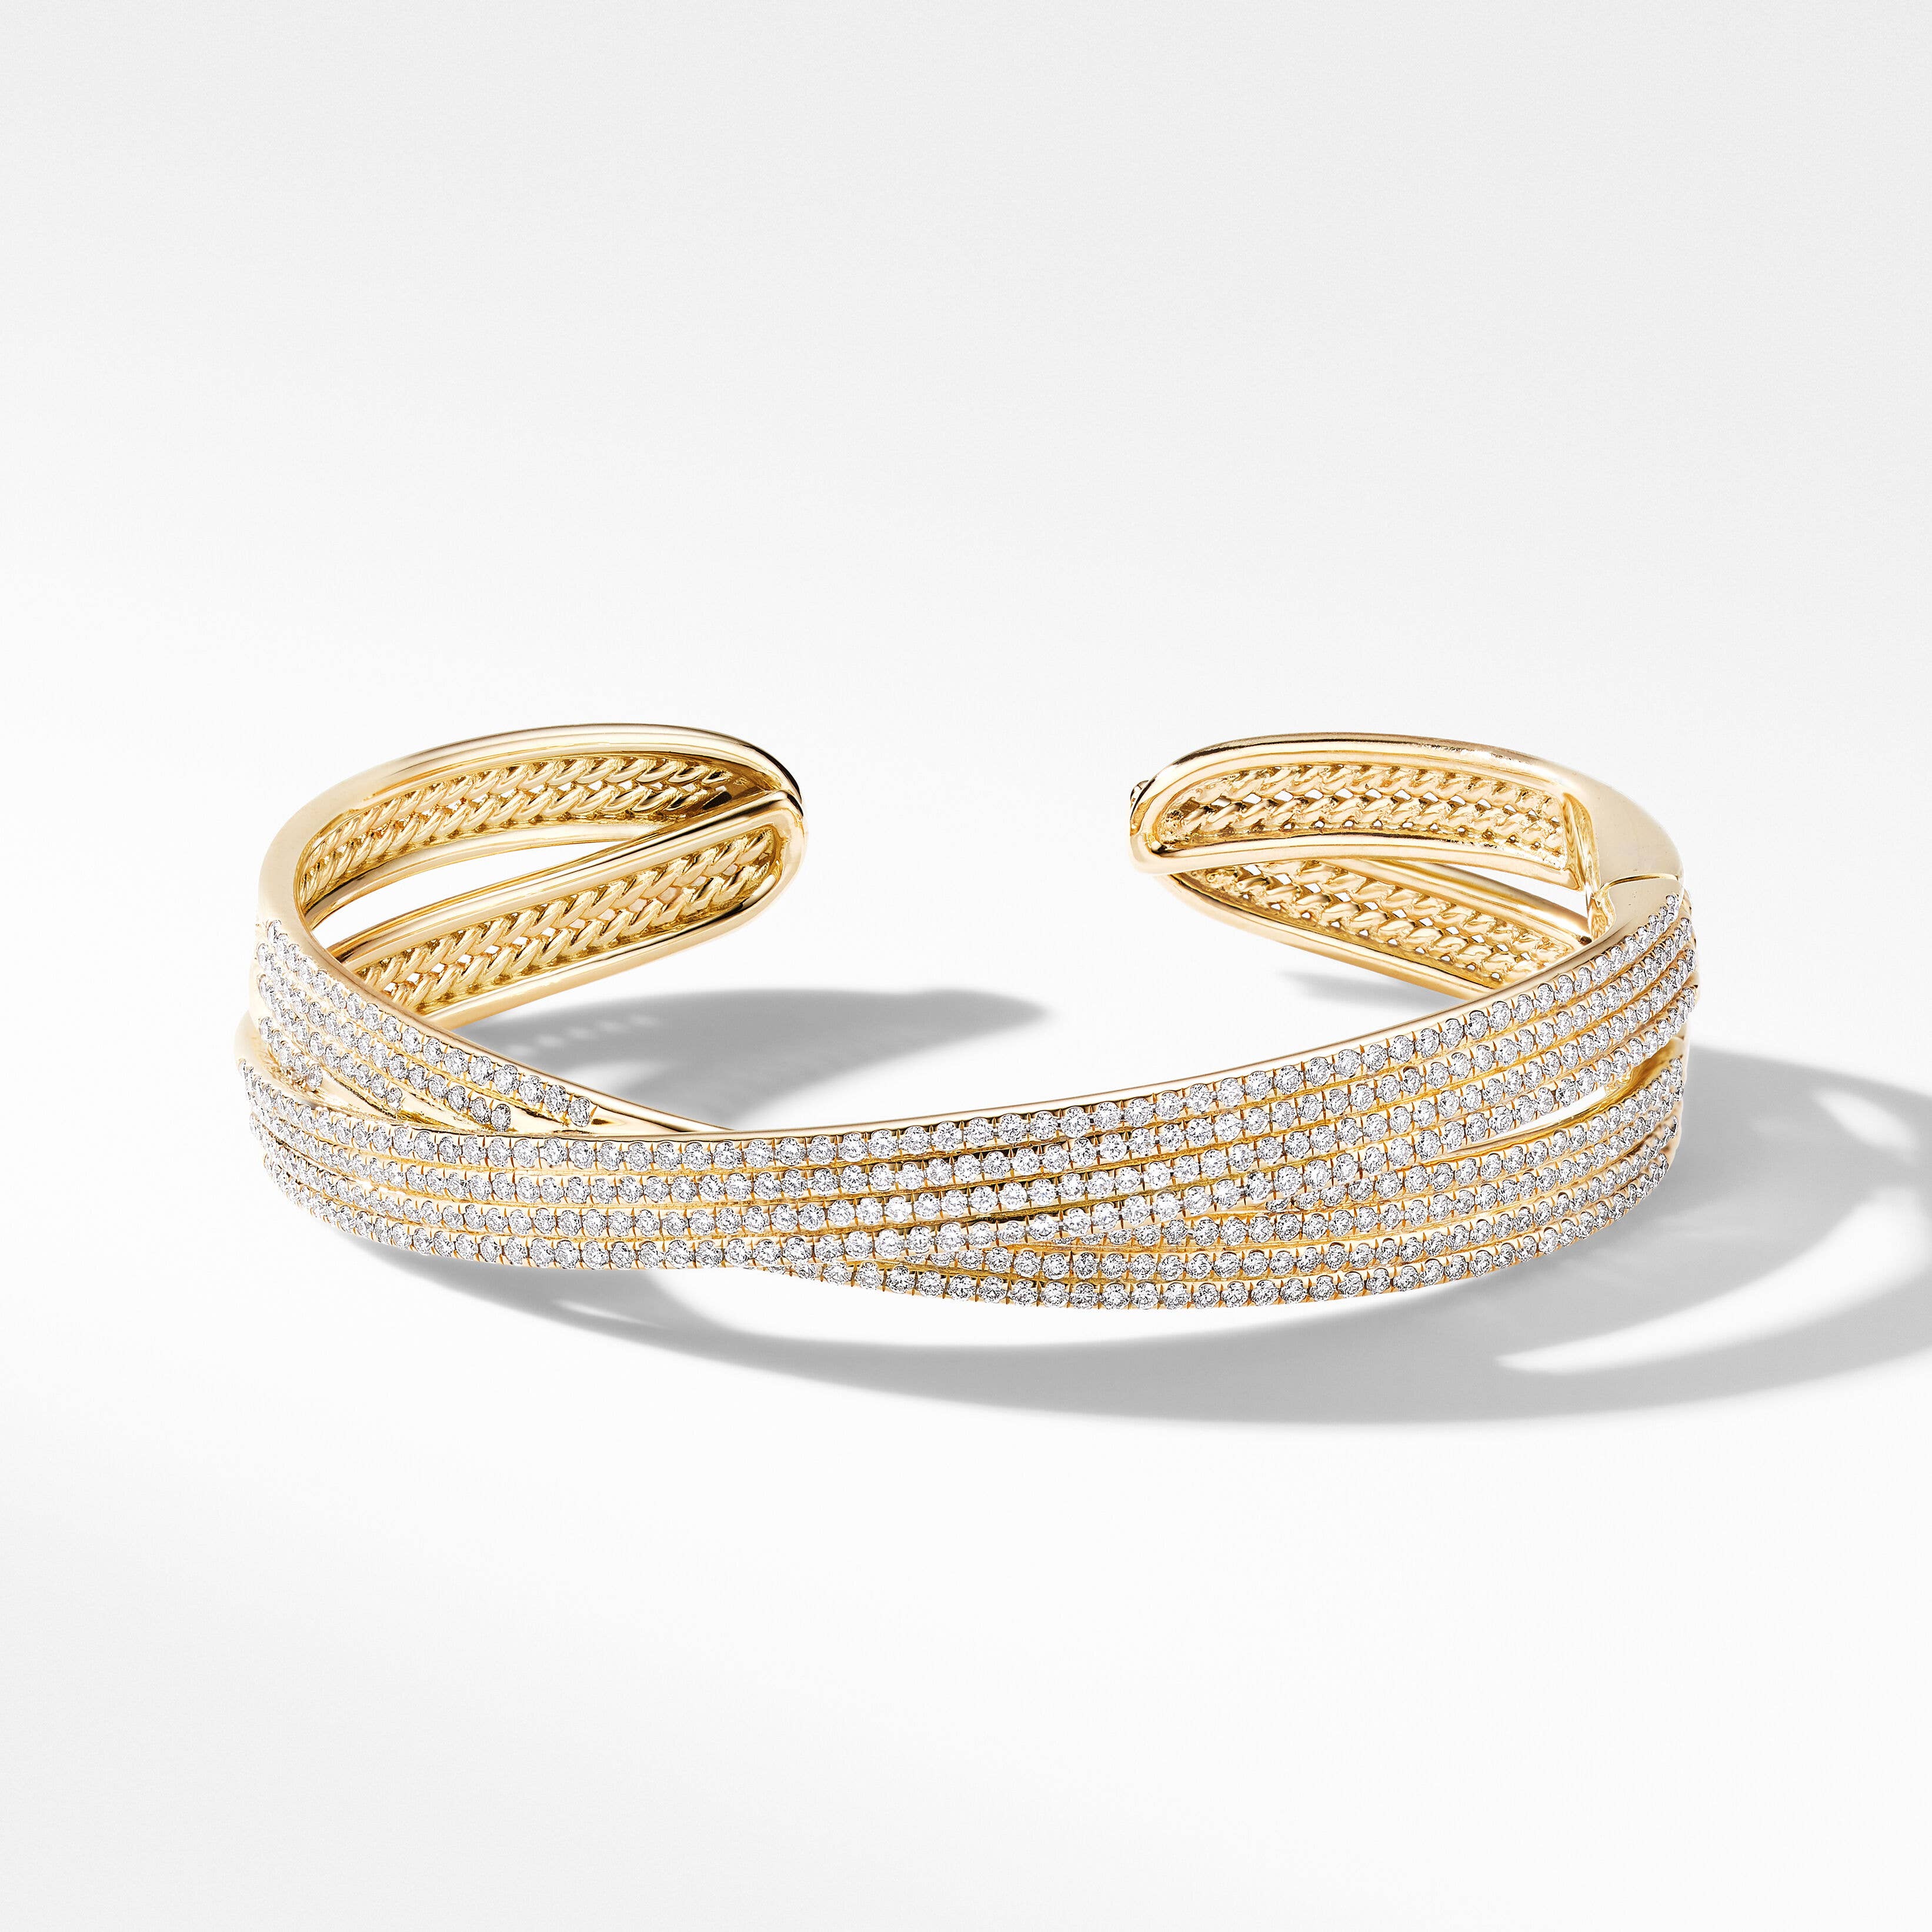 DY Origami Cuff Bracelet in 18K Yellow Gold with Full Pavé Diamonds